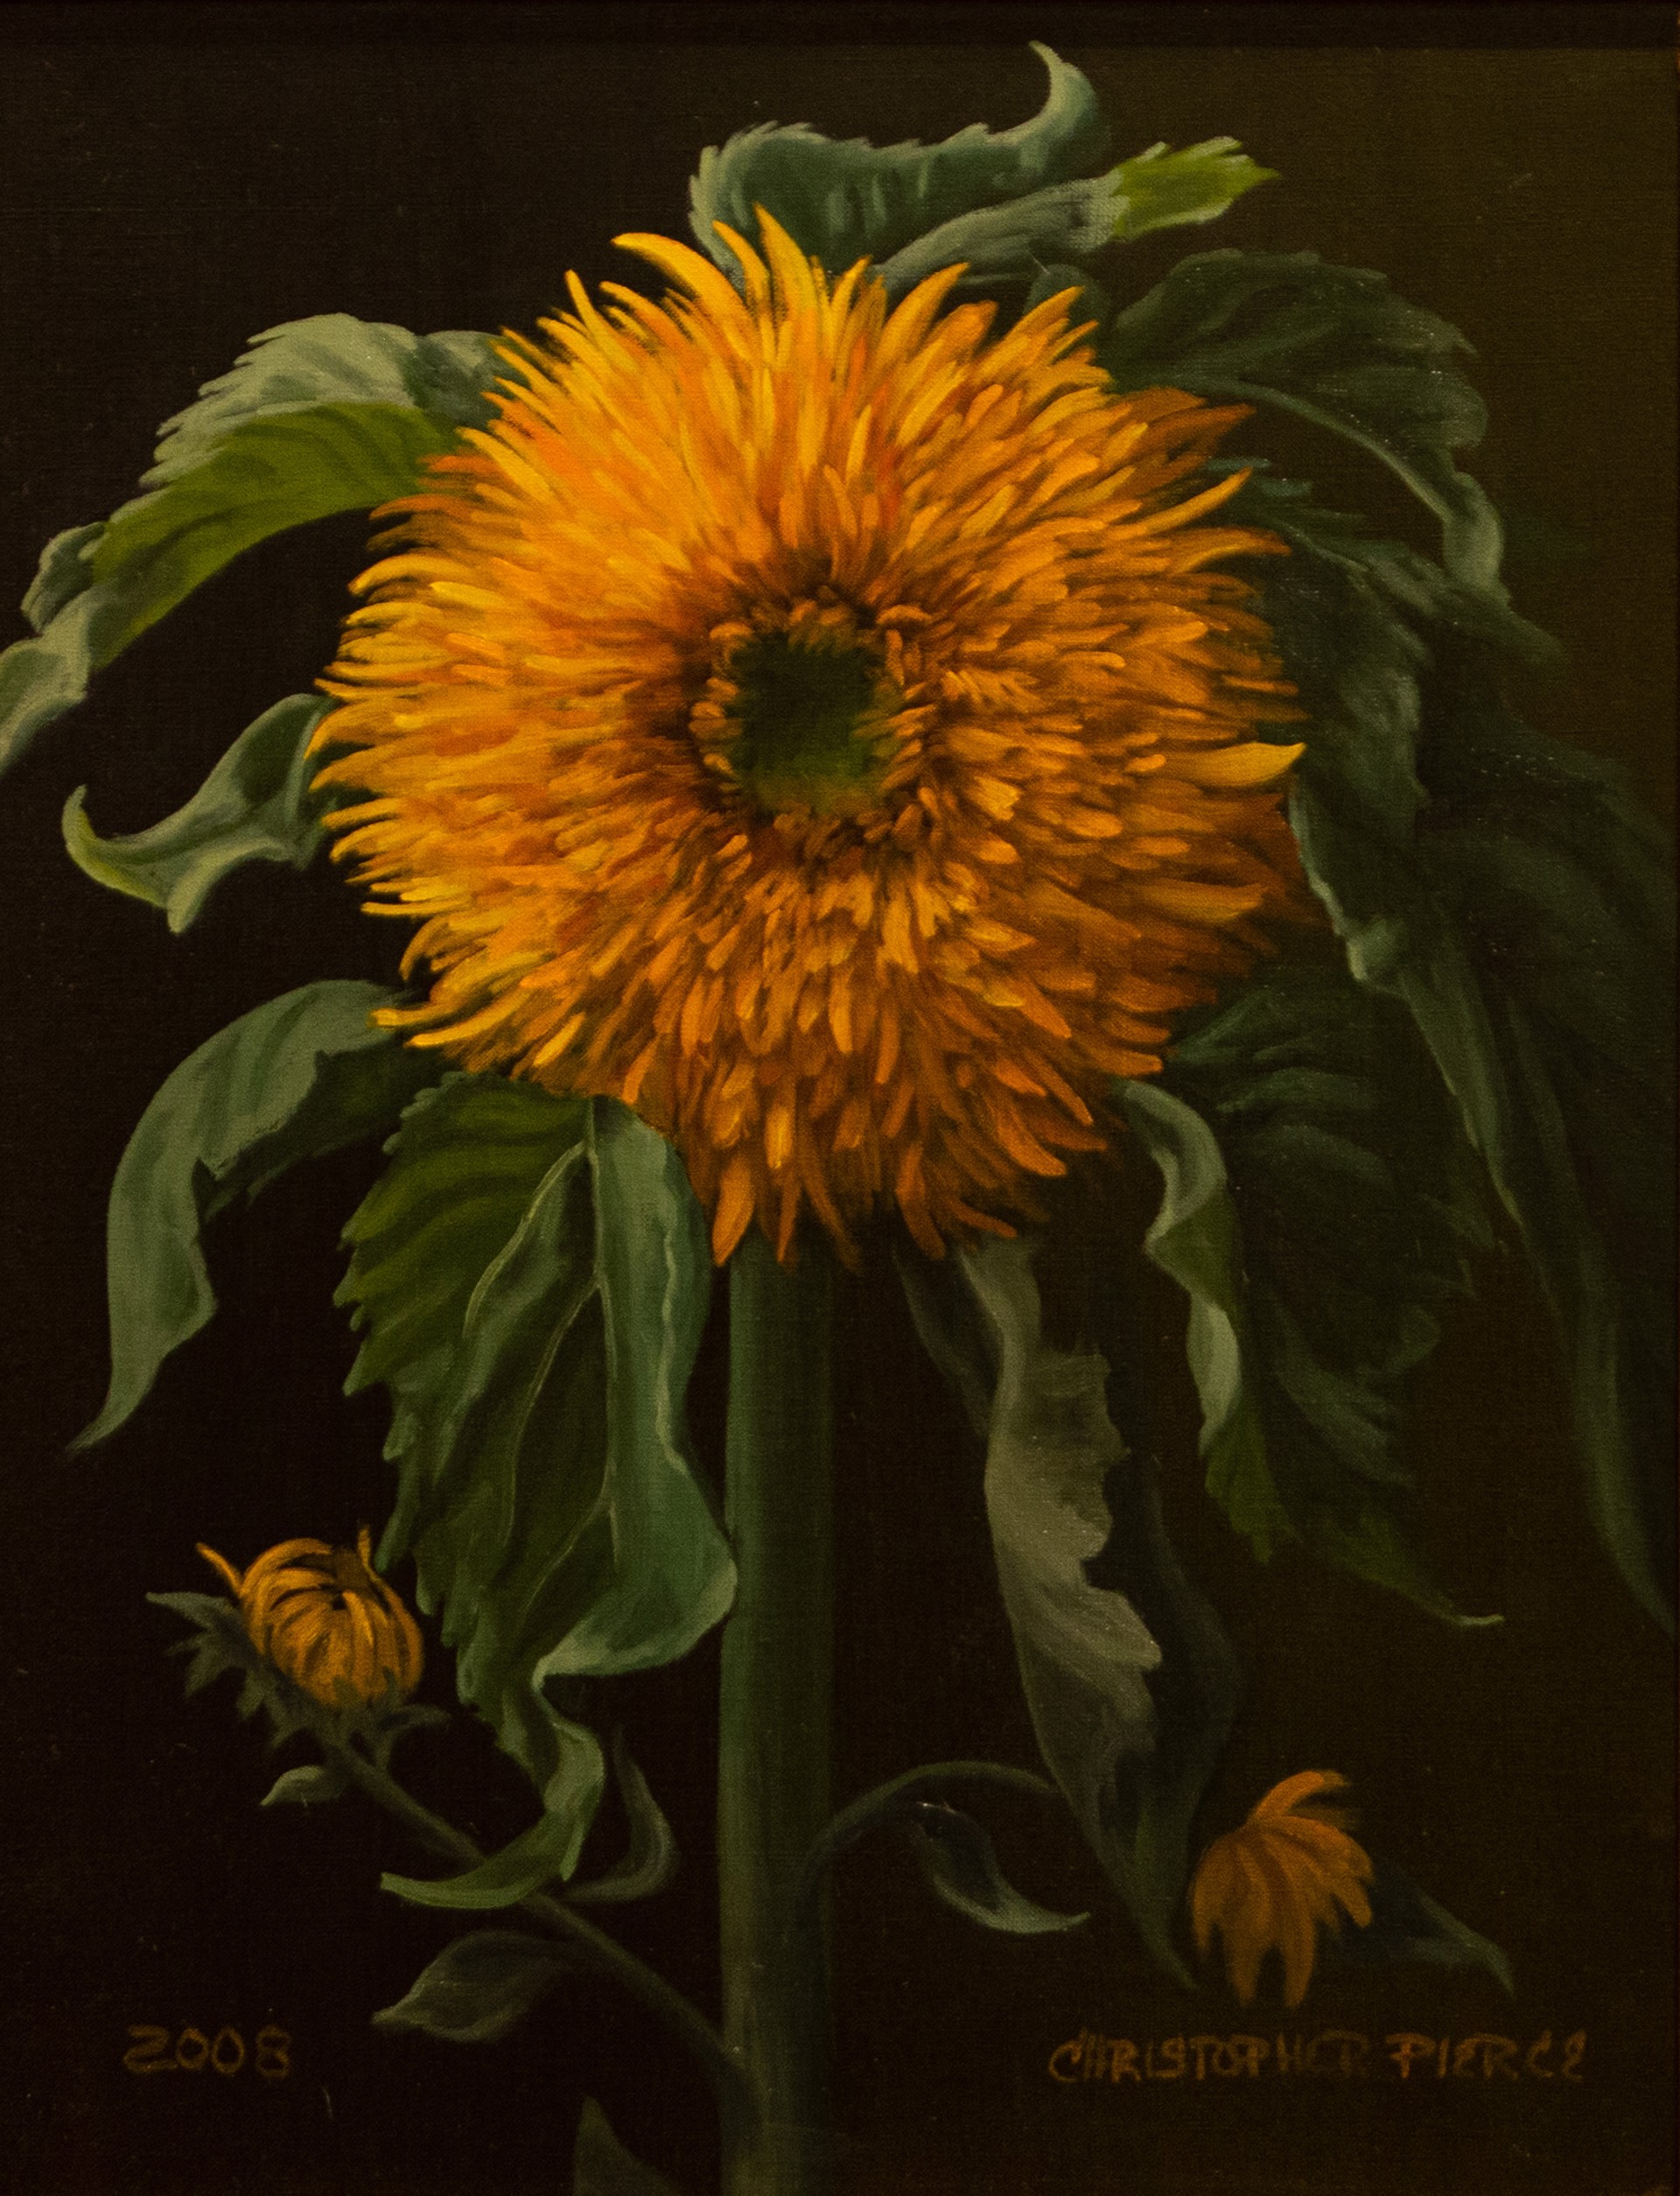 Double Sunflower by Christopher Pierce